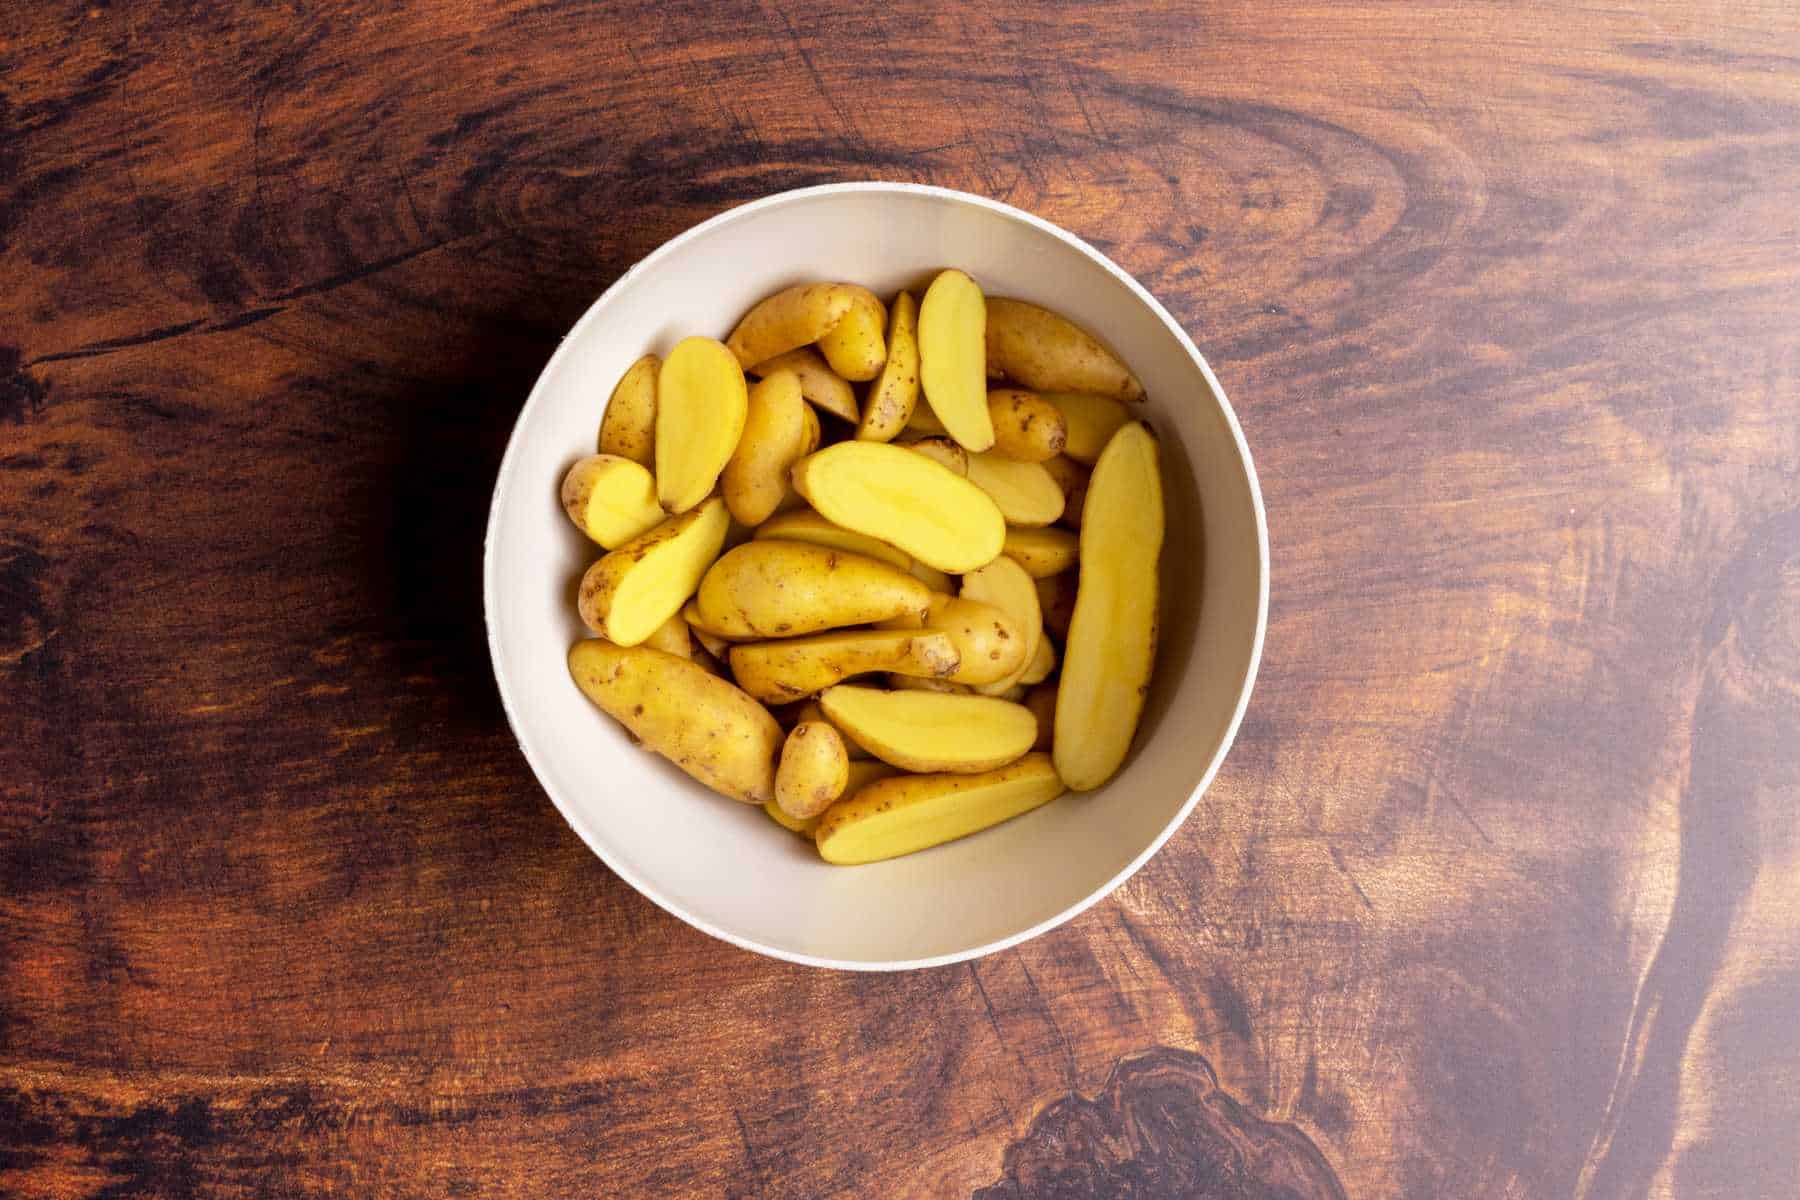 Fingerling potatoes cut lengthwise in a bowl.